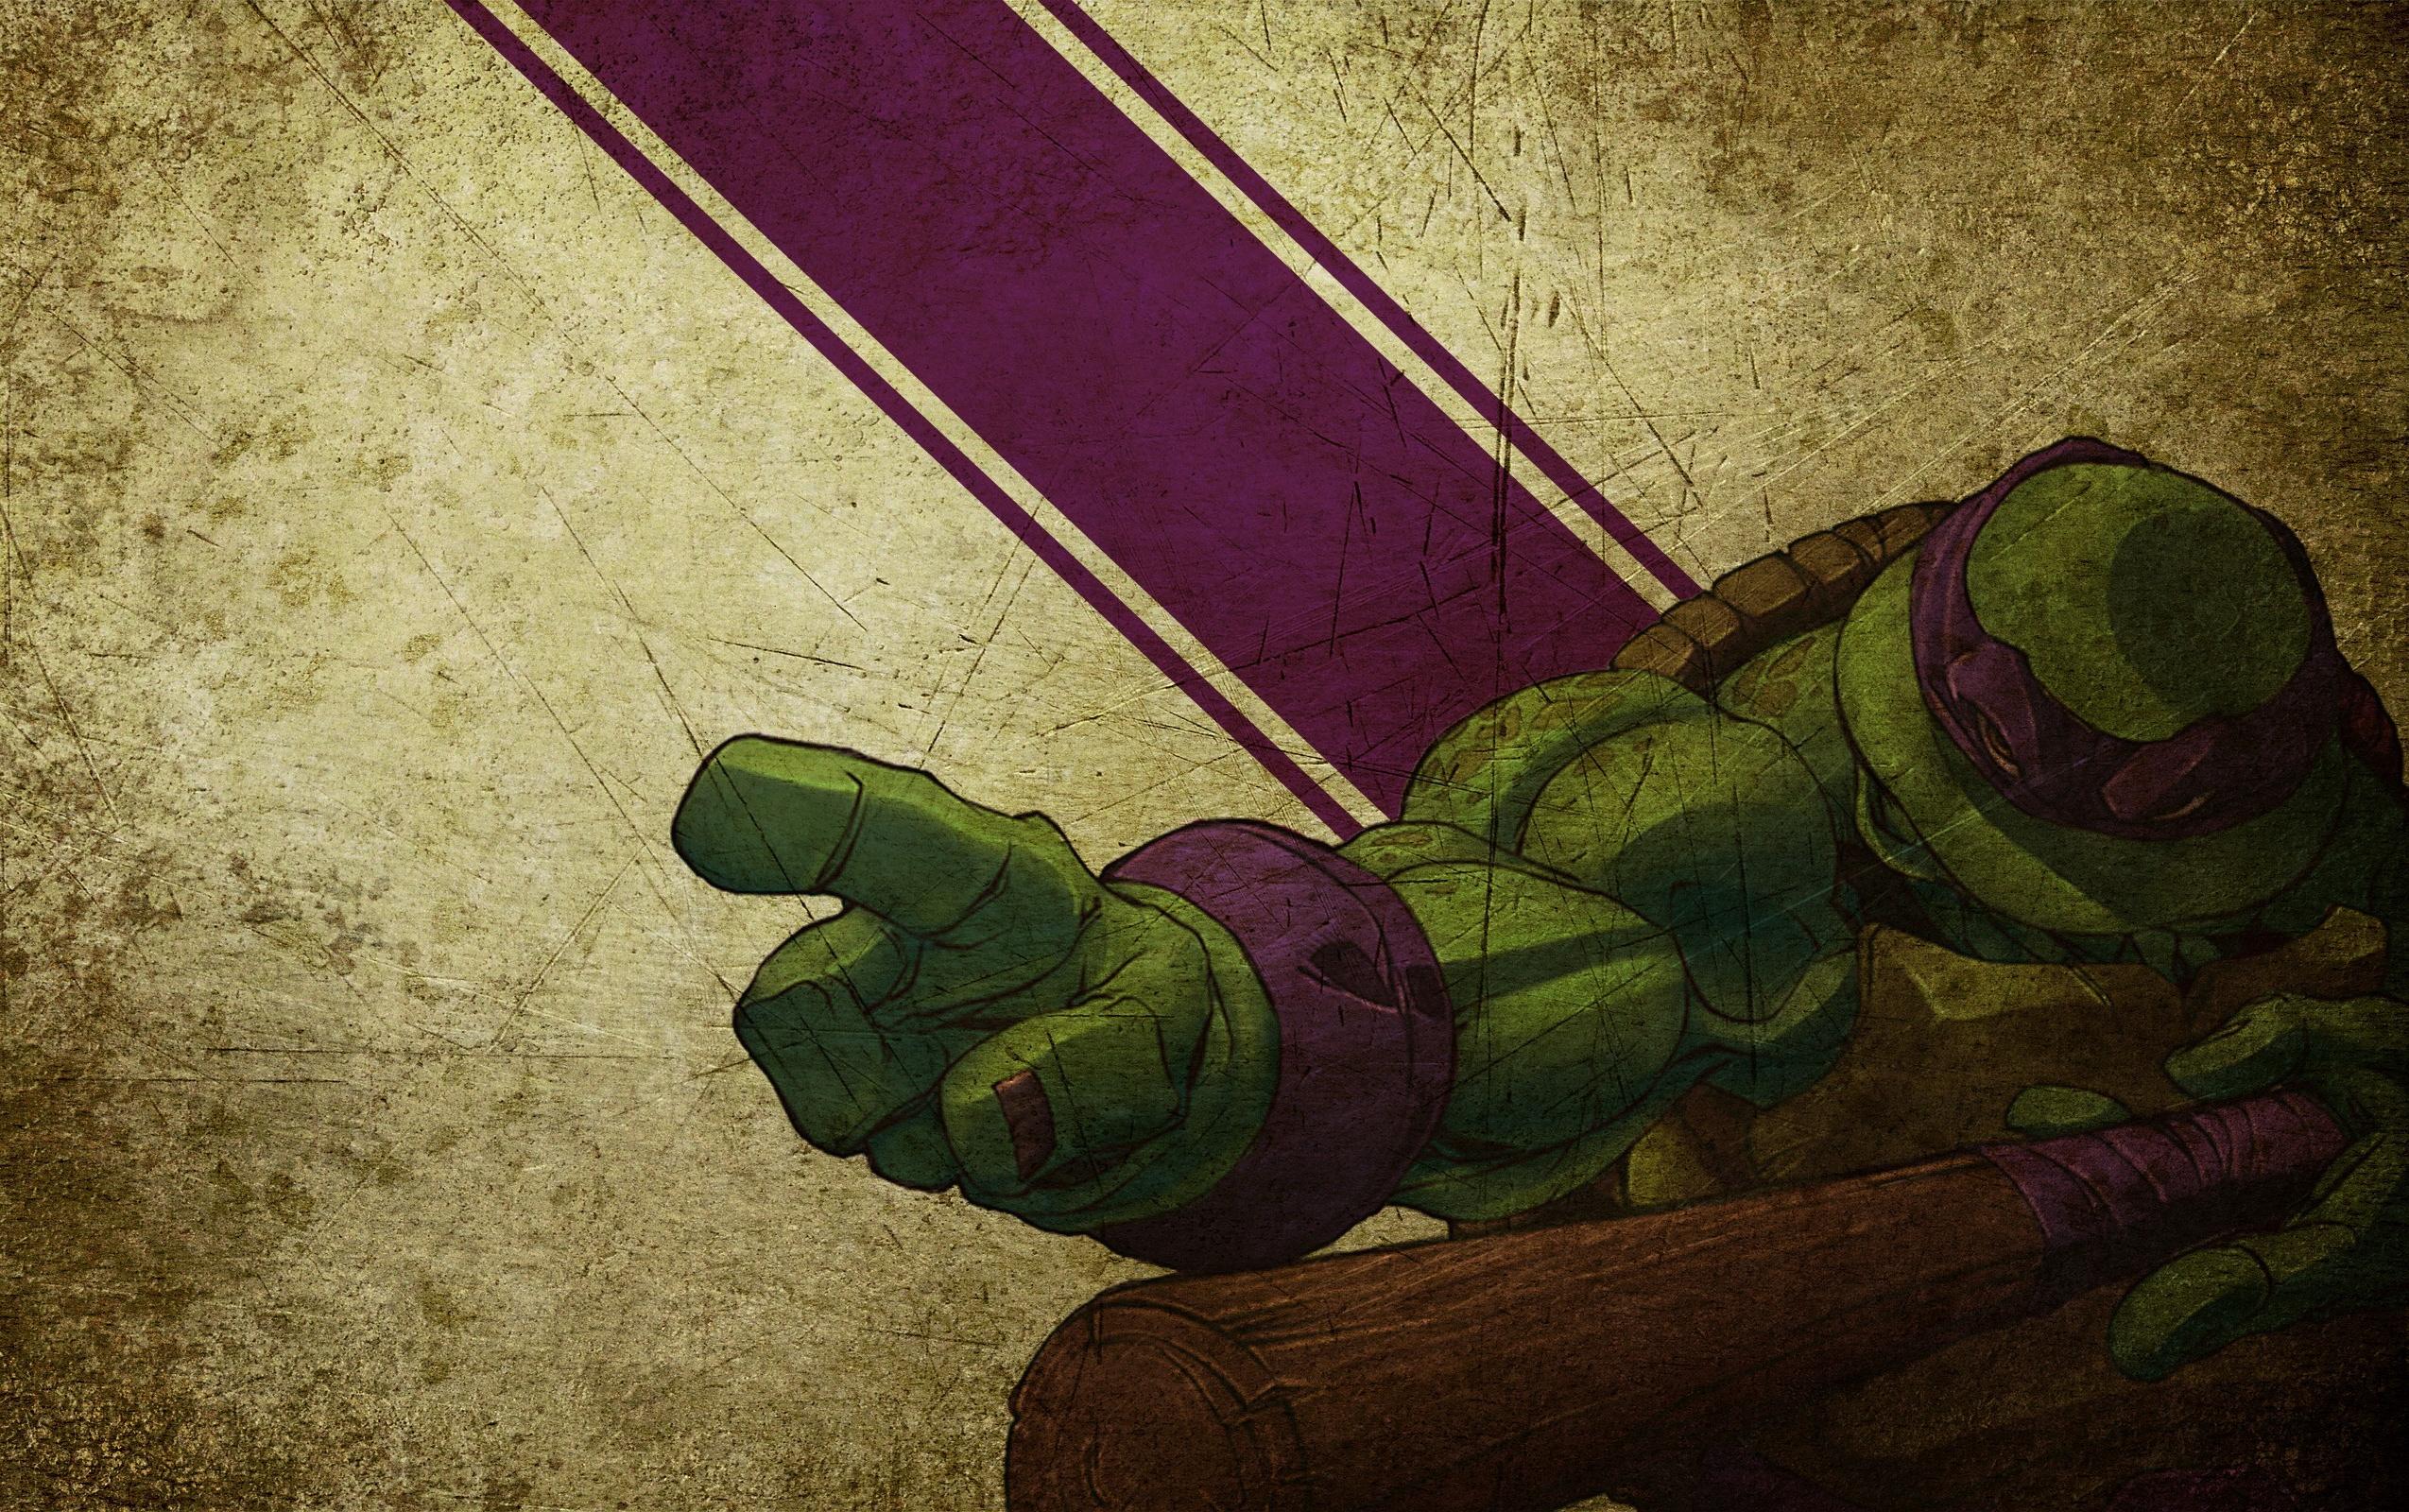  Tmnt HD Android Wallpapers